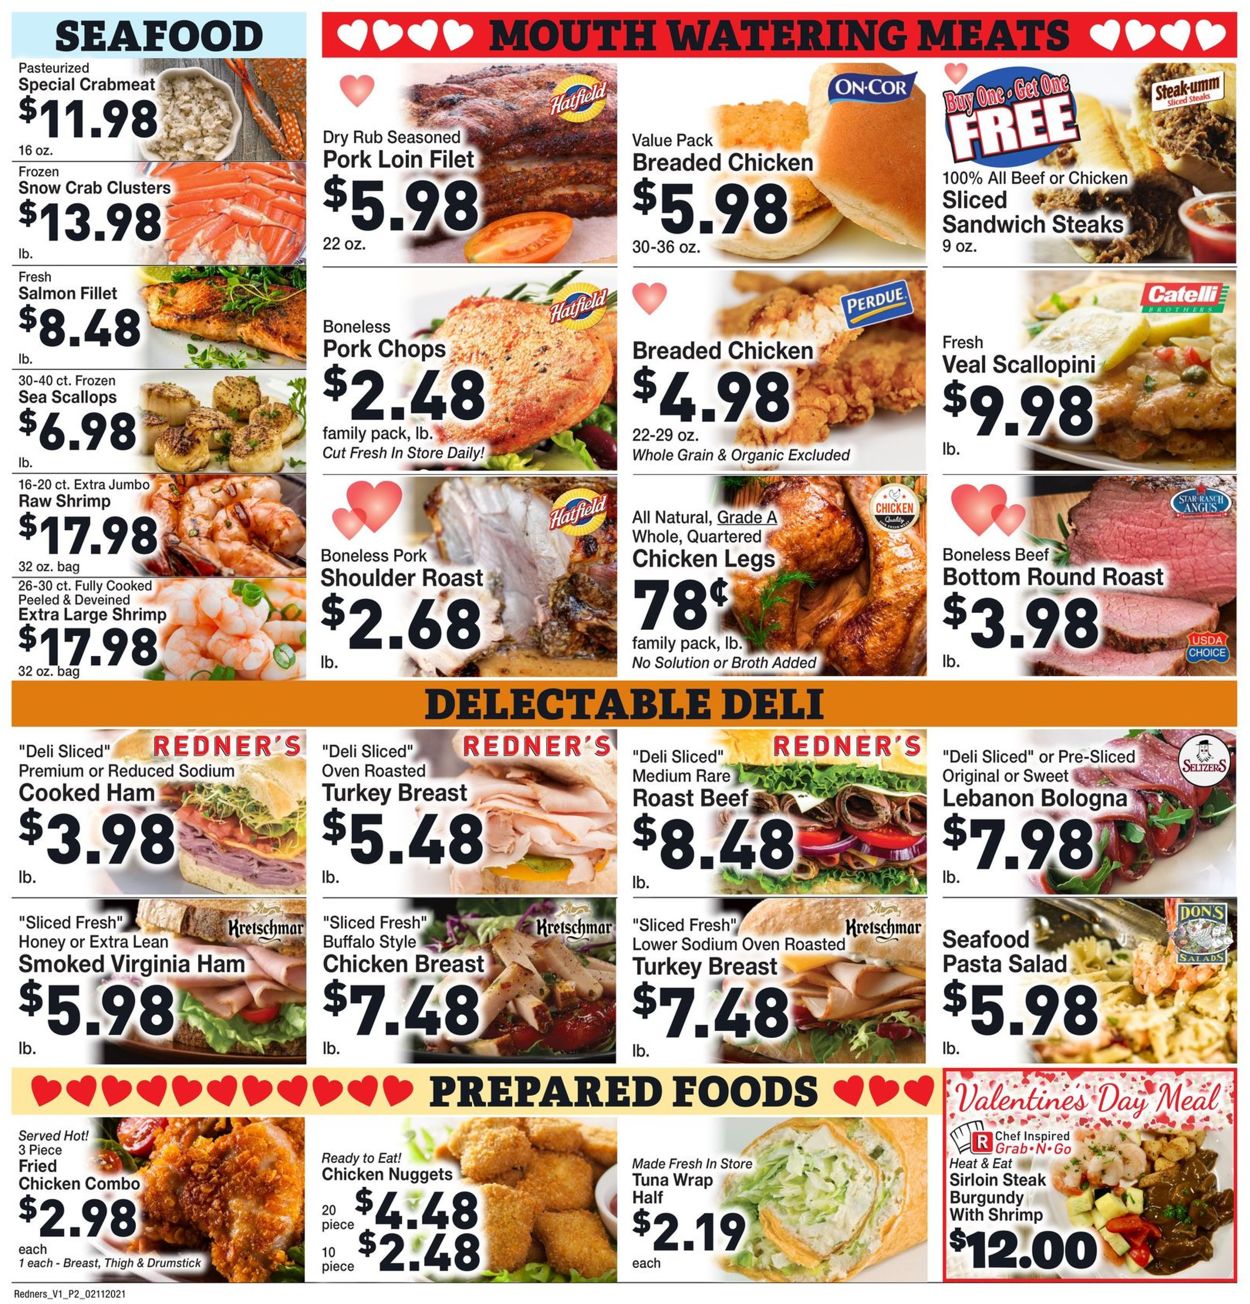 Catalogue Redner’s Warehouse Market from 02/11/2021